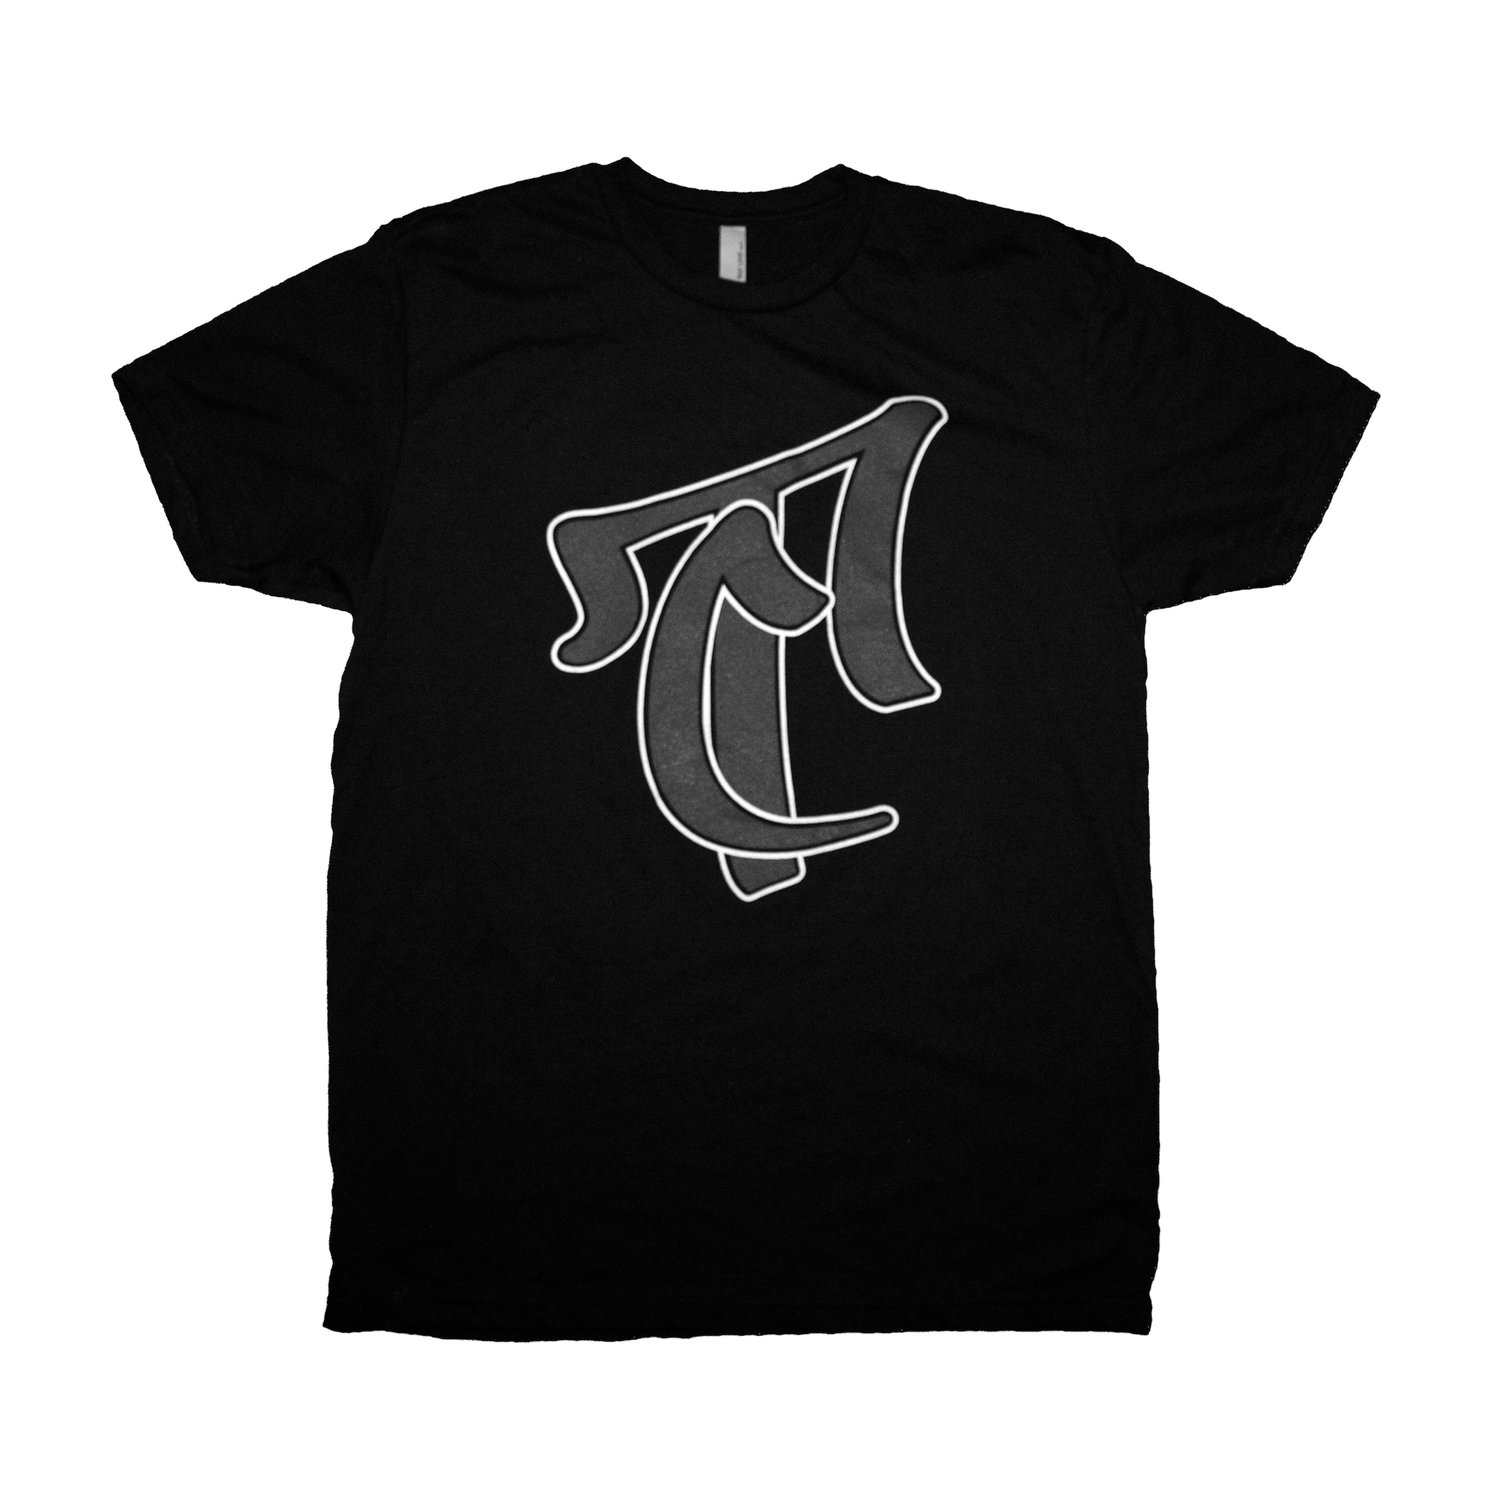 Image of The TC Logo Tee in Black/Gray